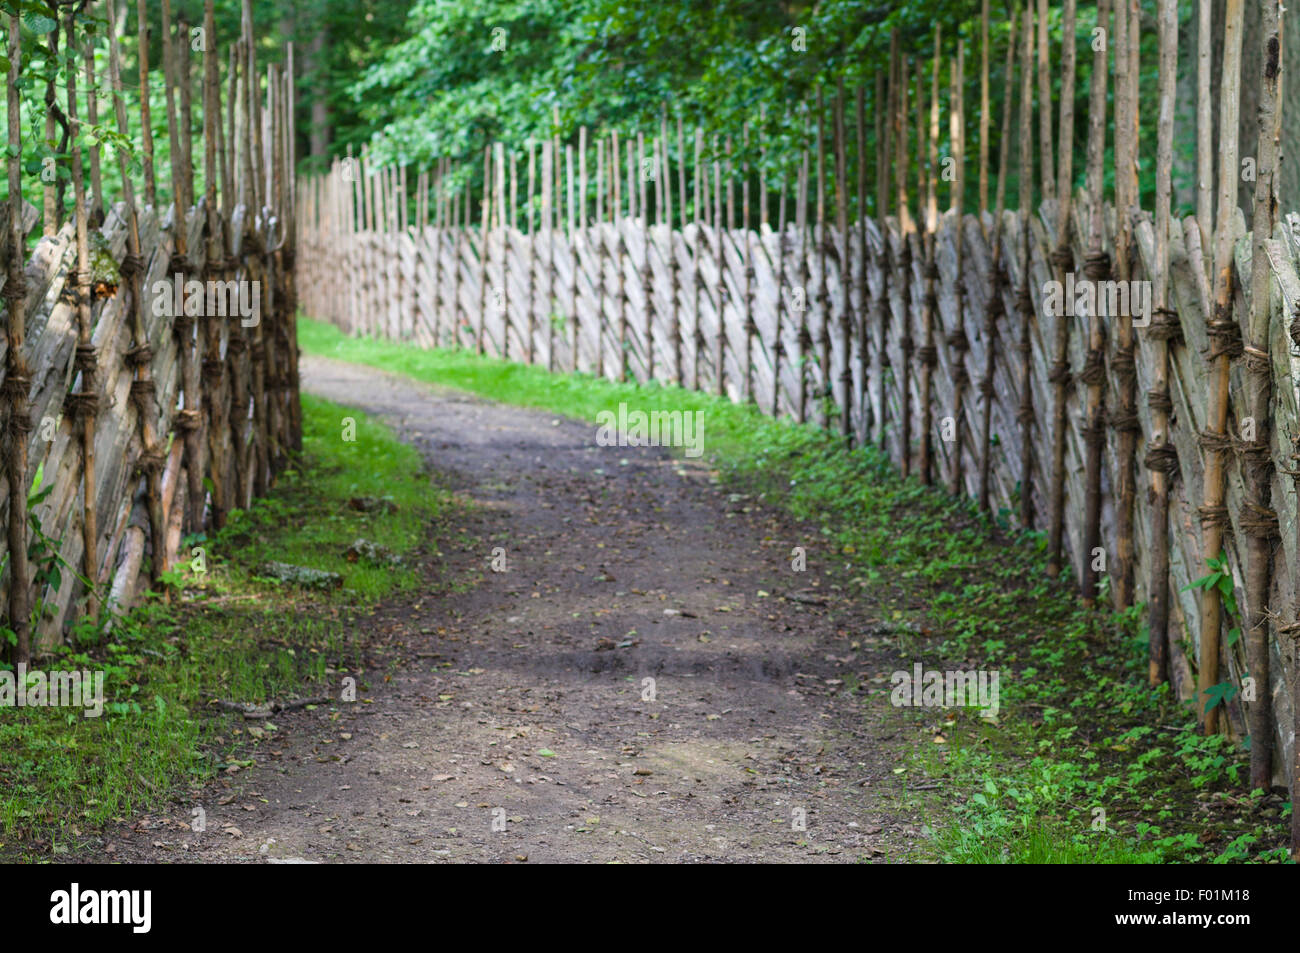 Defocused background of turning footpath between decorative wooden fences Stock Photo